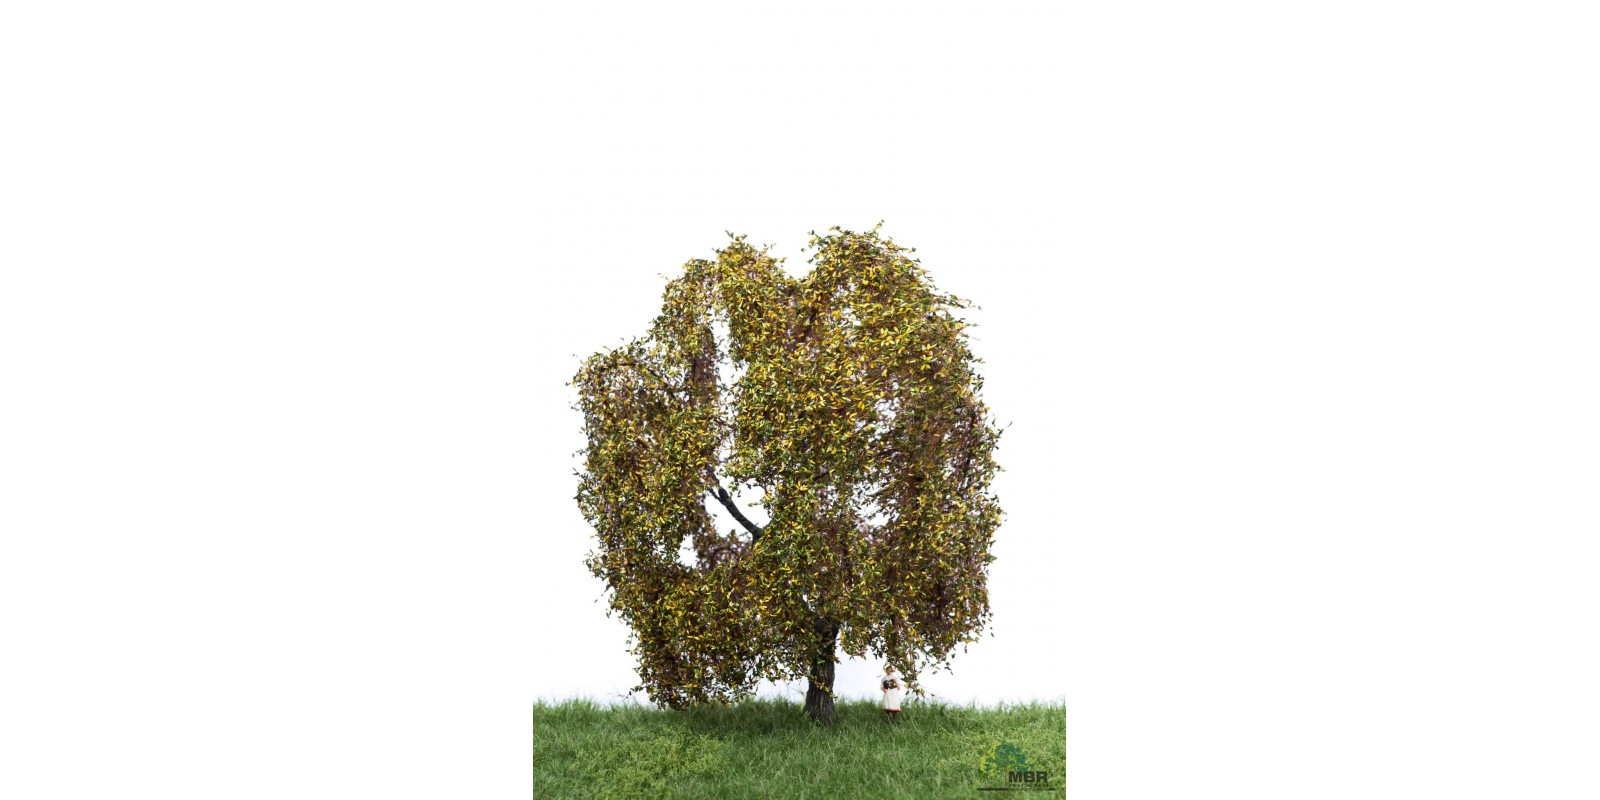 MBR52_2309 Weeping willow 18-22cm